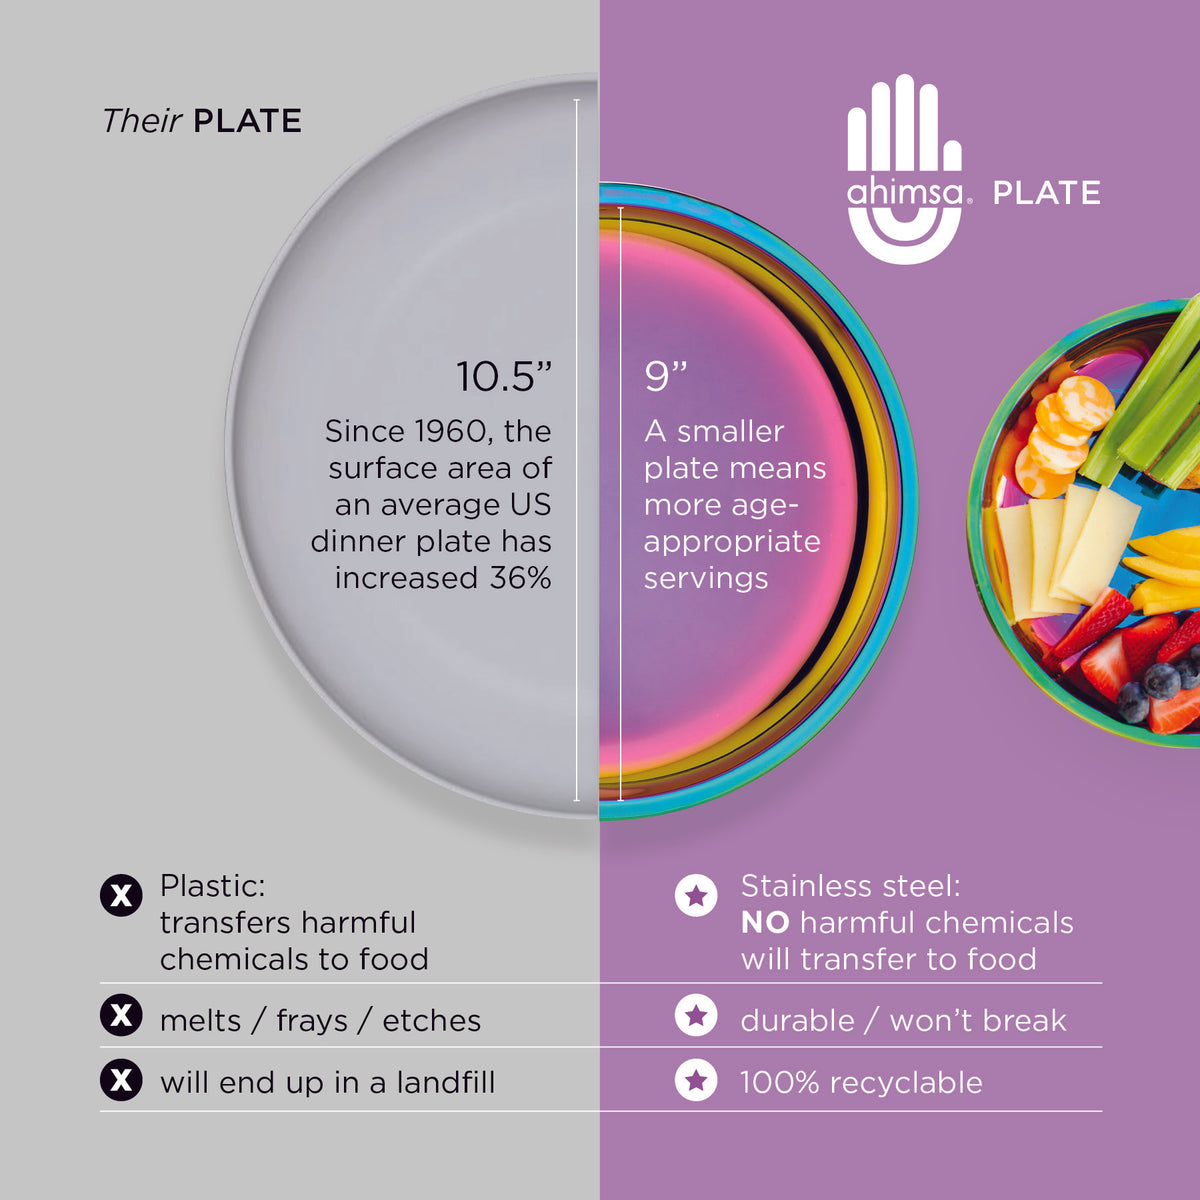 Stainless steel means no harmful chemicals will transfer into food, unlike plastic. Our plates our durable - they won&#39;t break and 100% recyclable. Plus a smaller plate means more age-appropriate serving sizes.